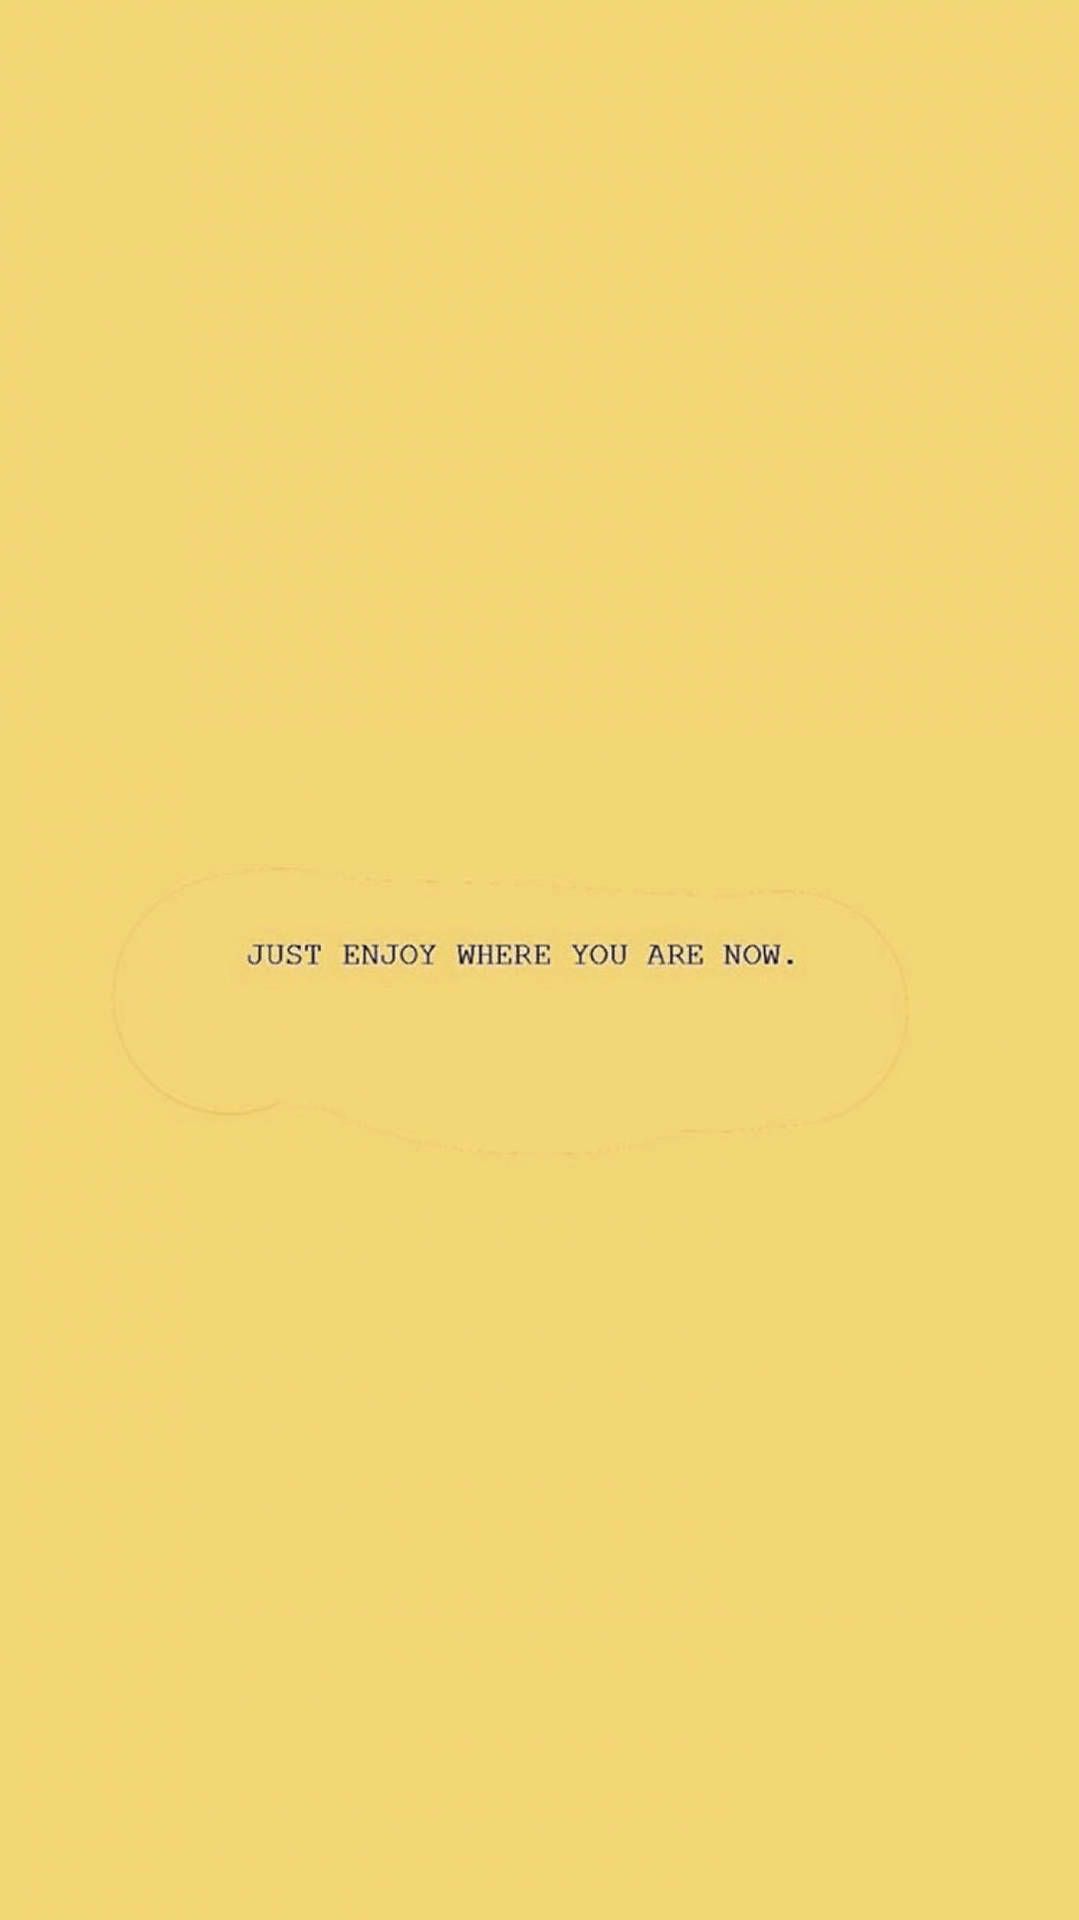 Download Sad Aesthetic Quote In Yellow Background Wallpaper